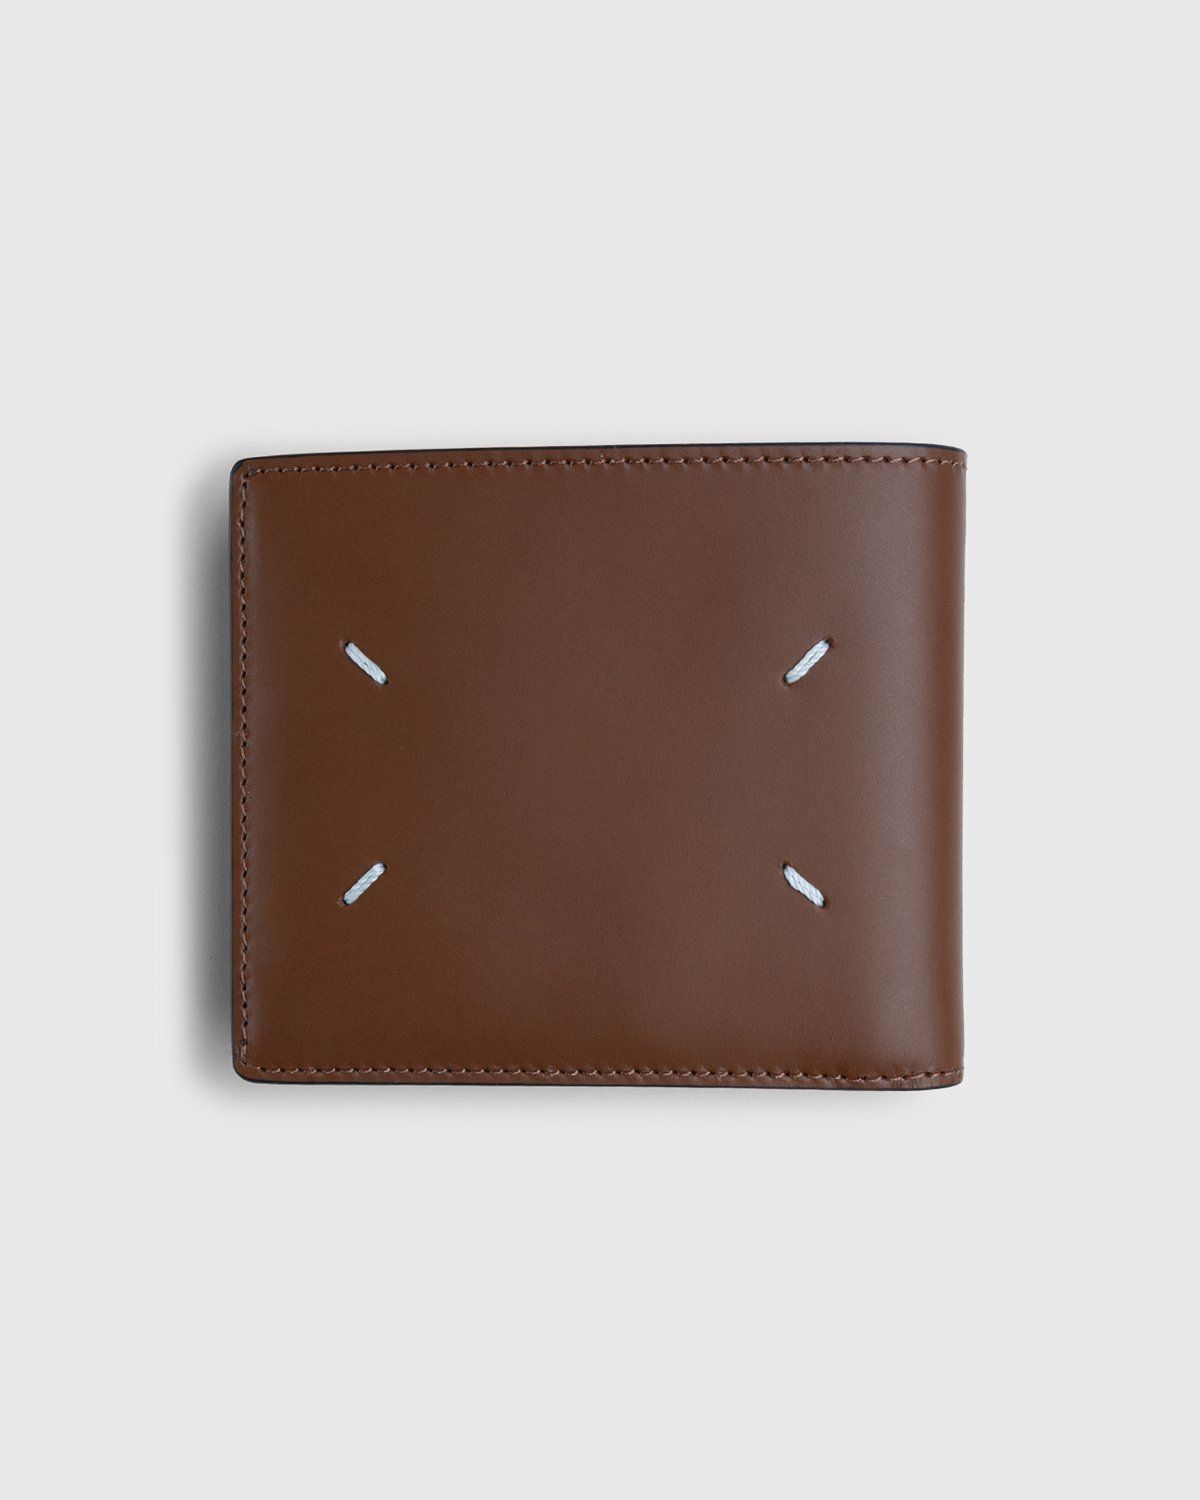 Maison Margiela – Leather Wallet Brown - Wallets - Brown - Image 1